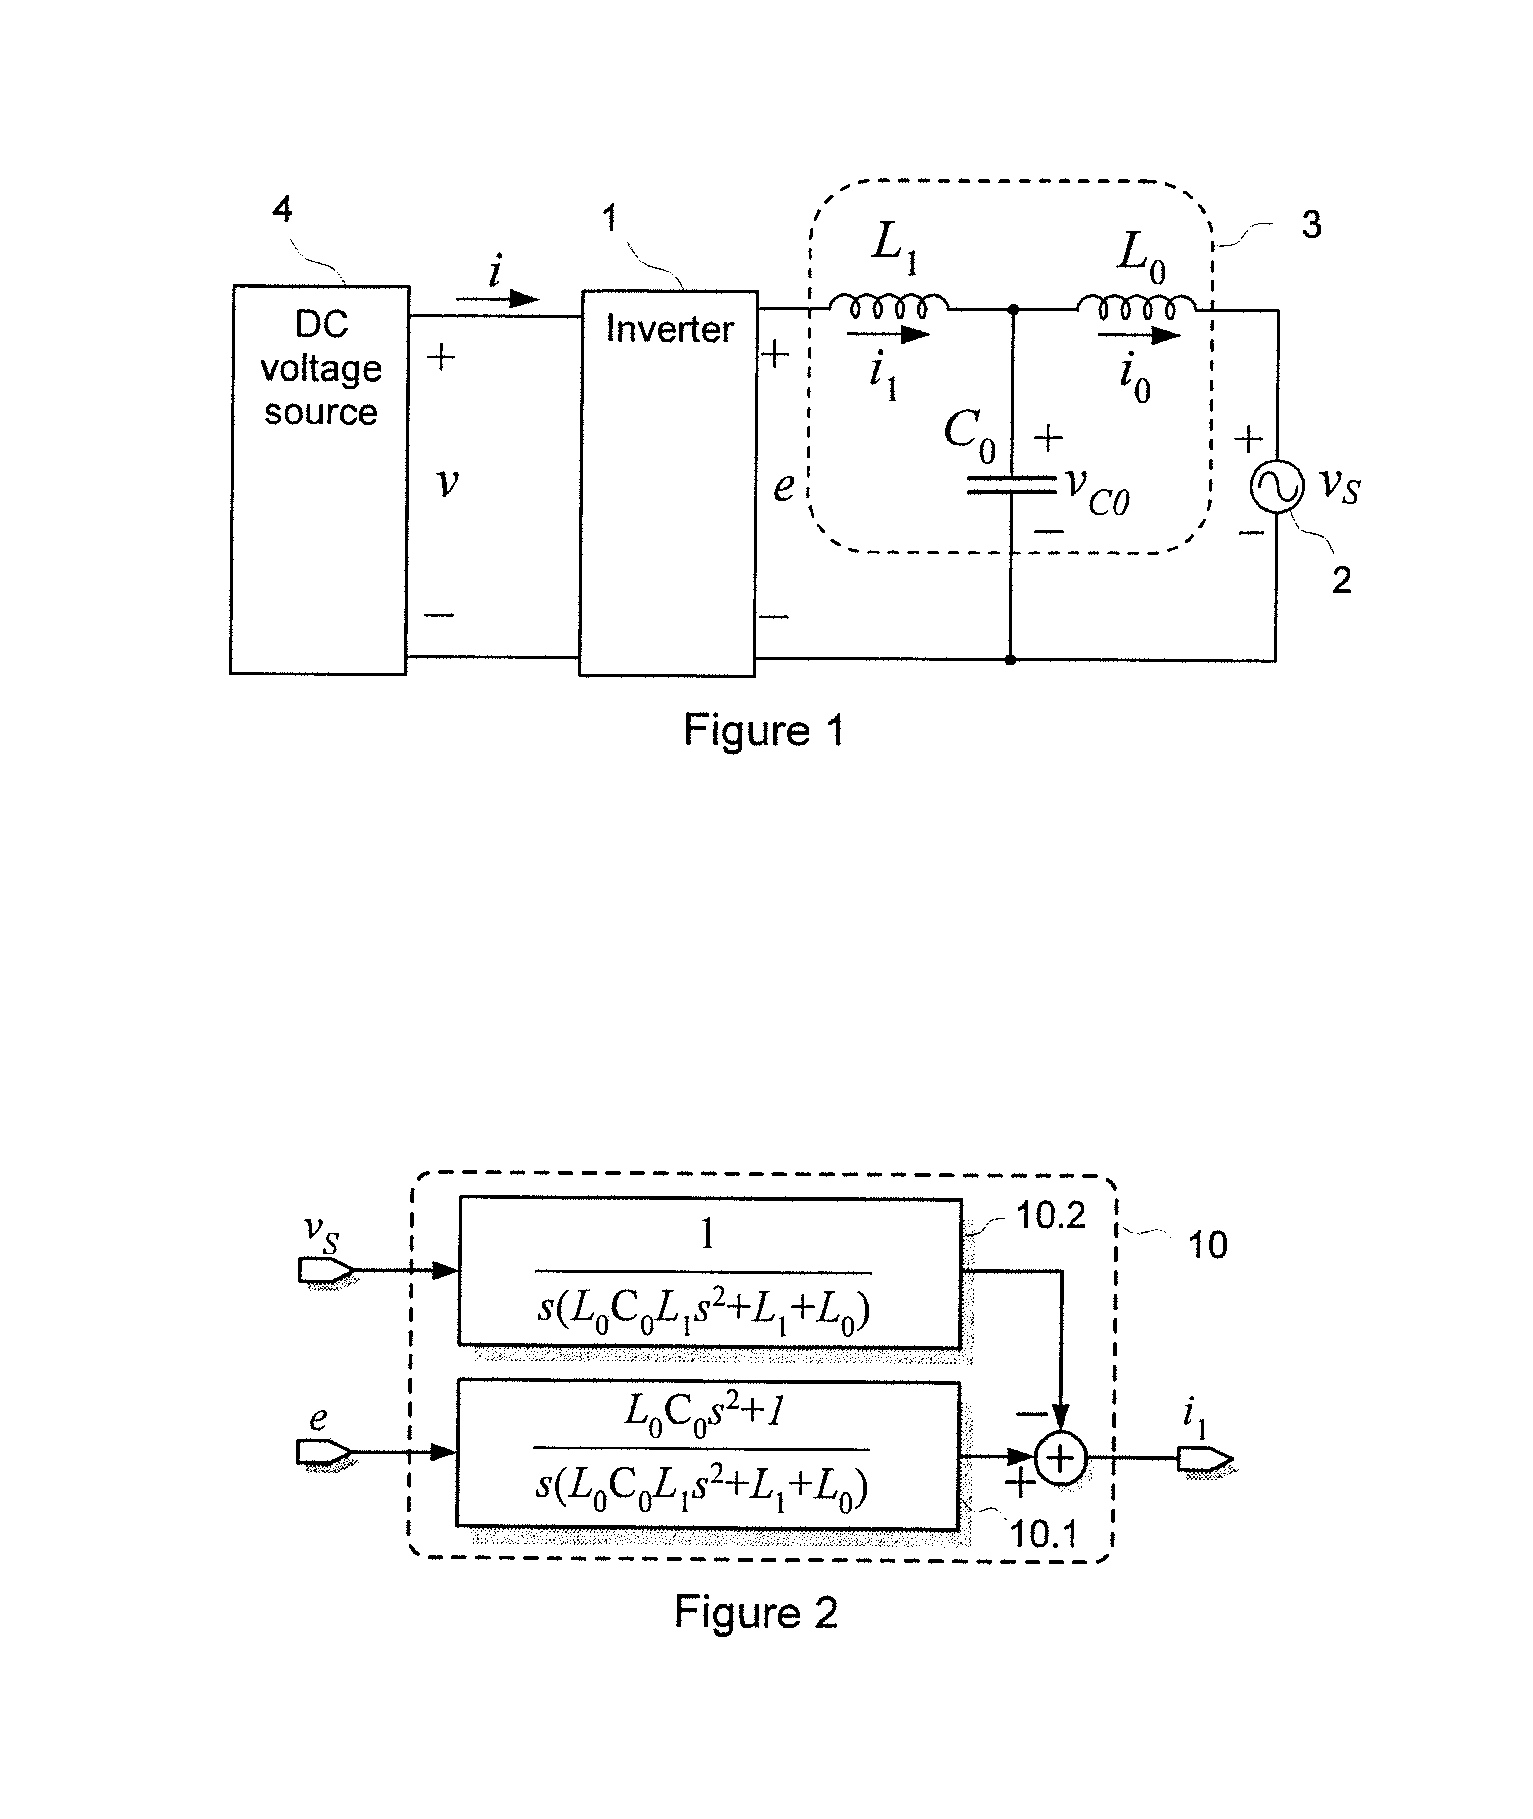 Control method for single-phase grid-connected LCL inverter